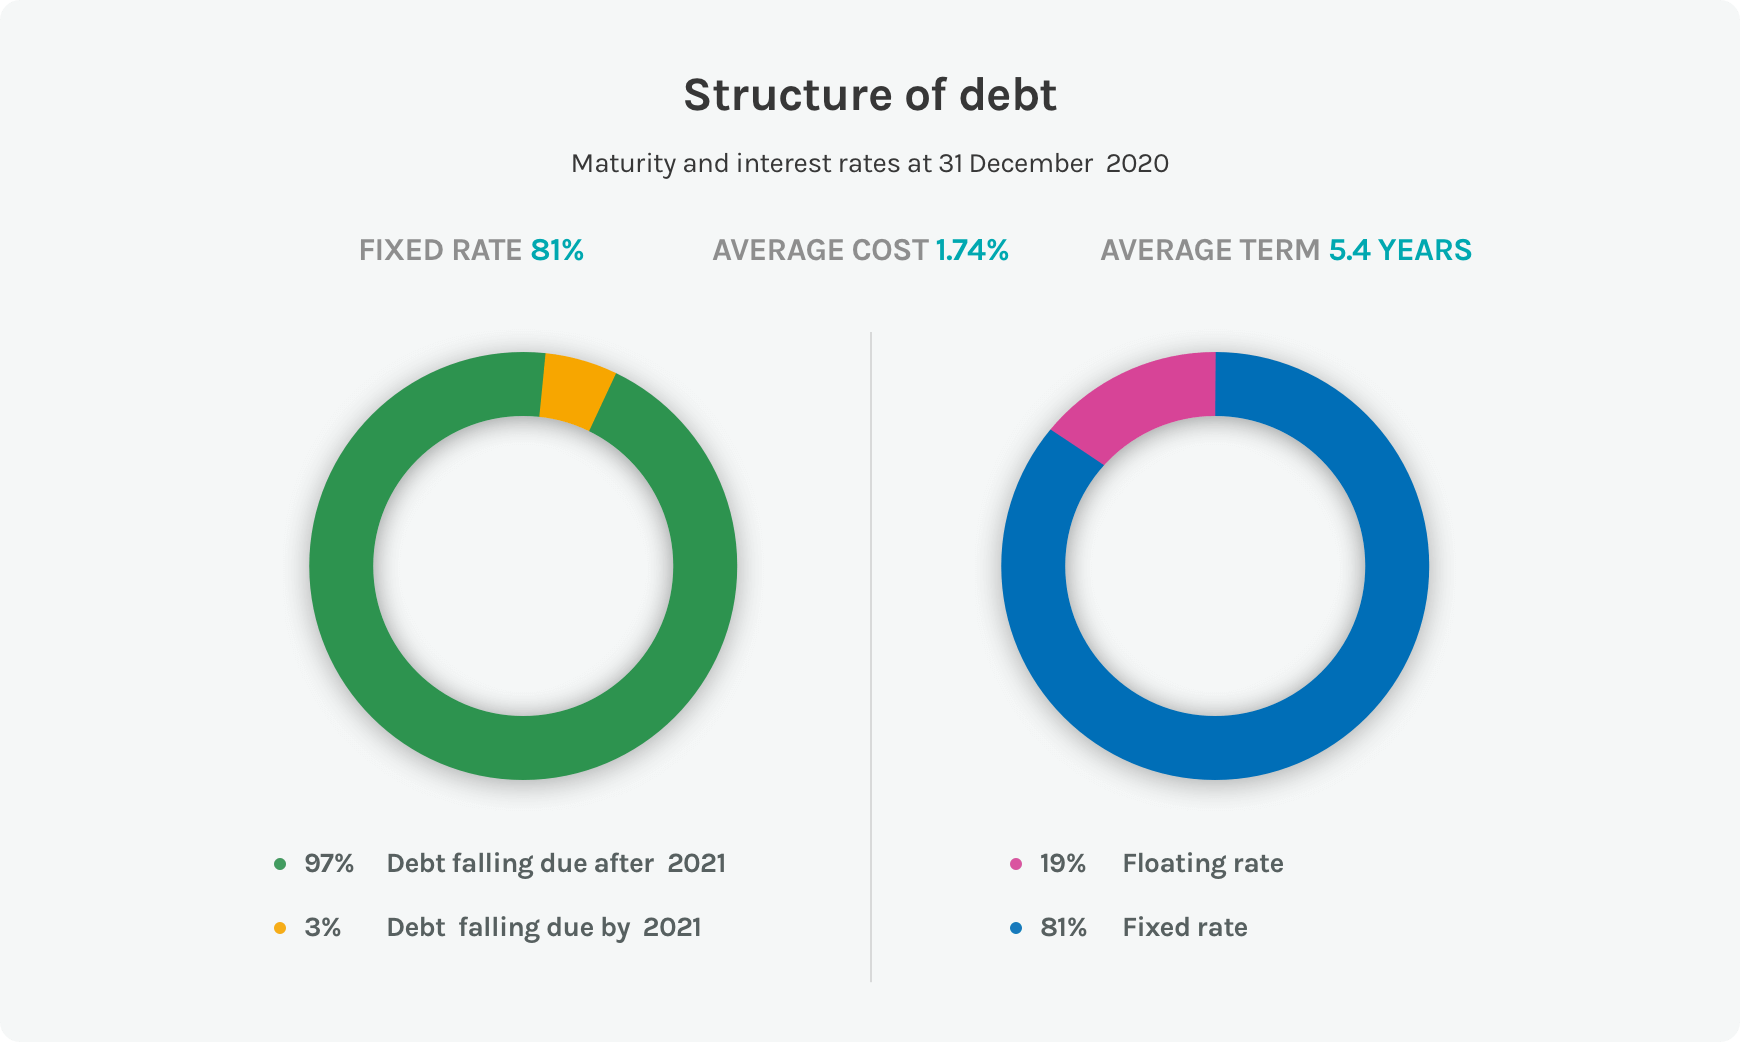 Diagrams on the debt structure of the Acea Group